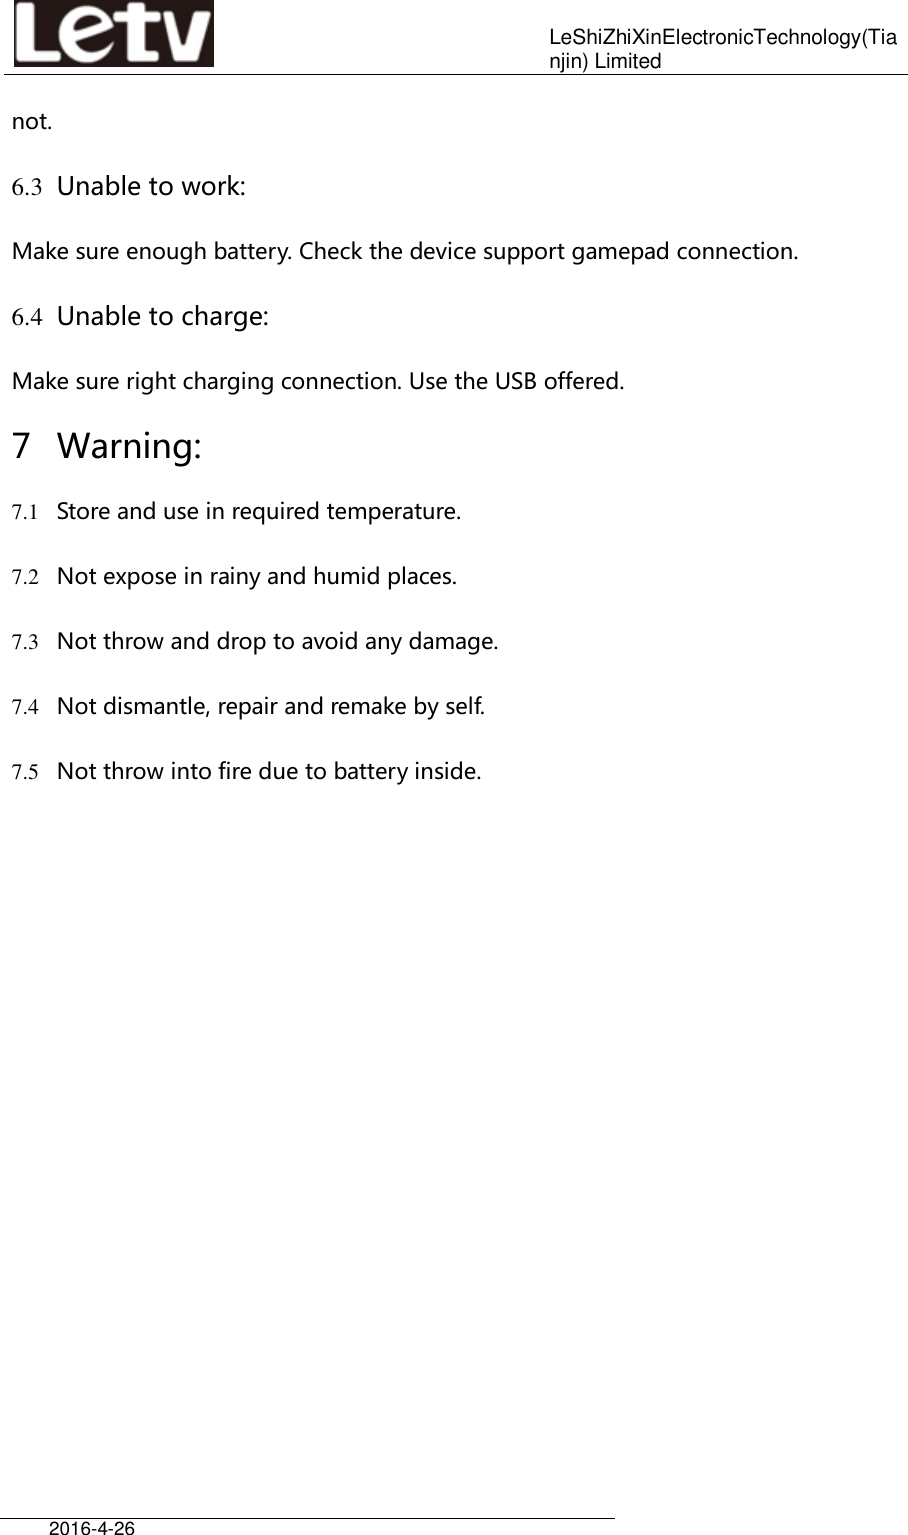    LeShiZhiXinElectronicTechnology(Tianjin) Limited  2016-4-26     not. 6.3 Unable to work: Make sure enough battery. Check the device support gamepad connection. 6.4 Unable to charge: Make sure right charging connection. Use the USB offered. 7 Warning: 7.1 Store and use in required temperature. 7.2 Not expose in rainy and humid places. 7.3 Not throw and drop to avoid any damage. 7.4 Not dismantle, repair and remake by self. 7.5 Not throw into fire due to battery inside.       